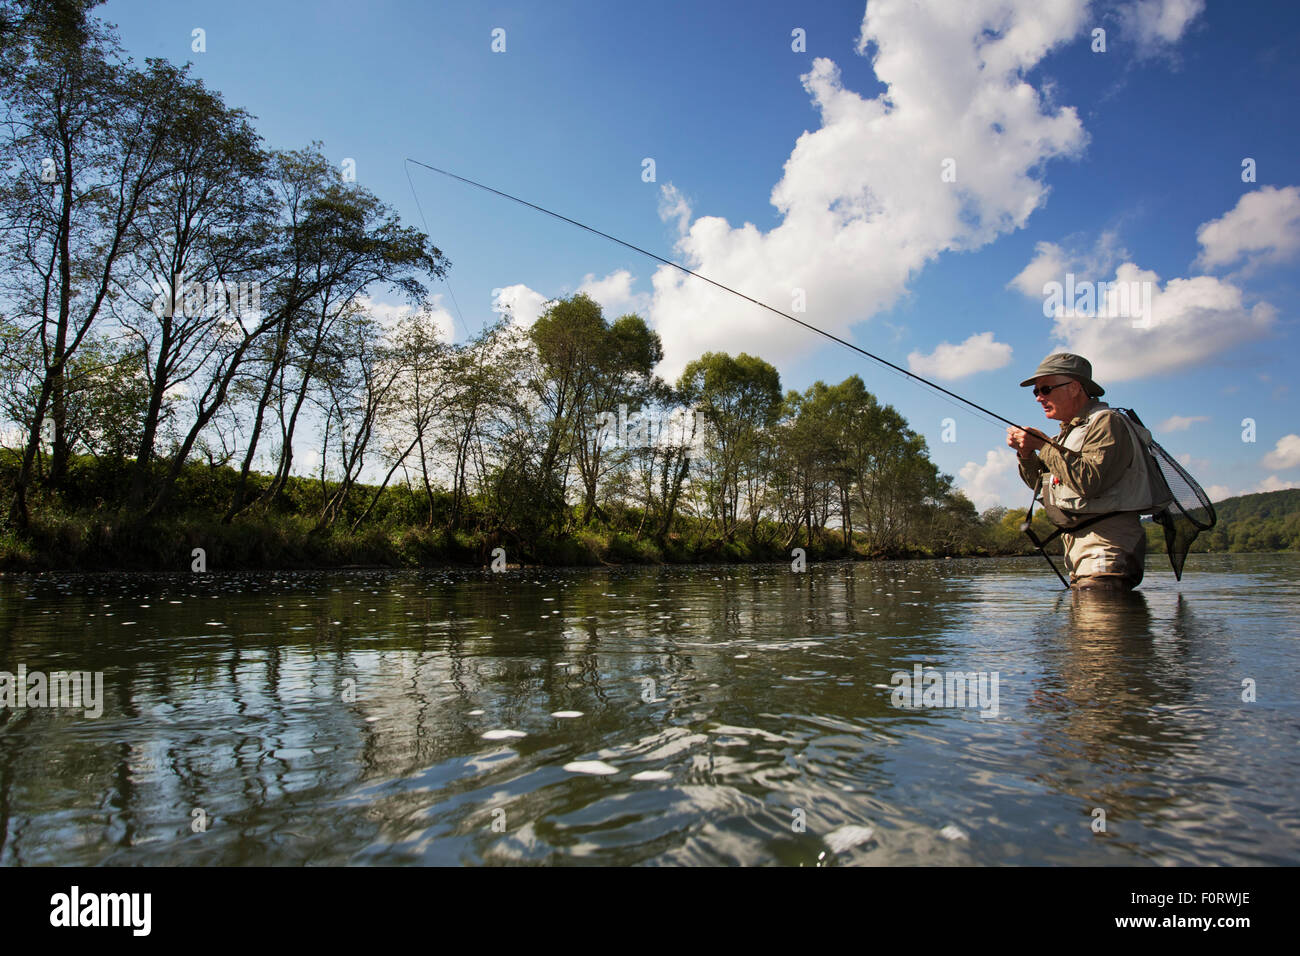 Man fly fishing for  European grayling (Thymallus thymallus) in the San River, Myczkowce, Poland, September 2011 Model released Stock Photo